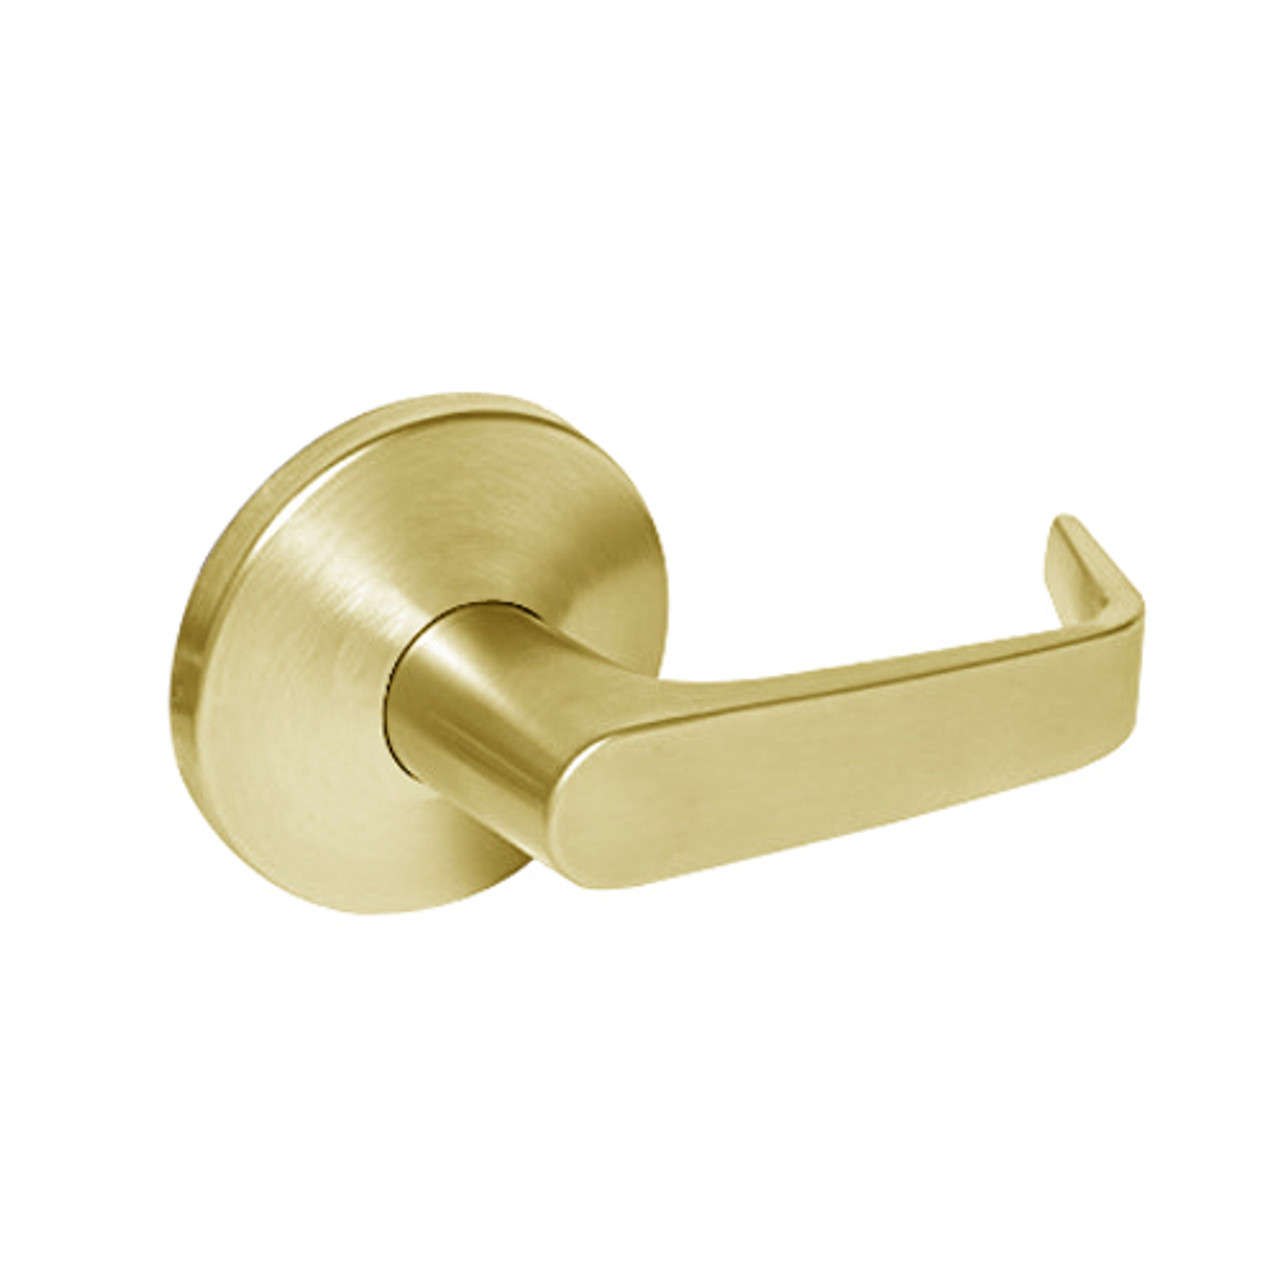 9K30Z15LS3605 Best 9K Series Closet Heavy Duty Cylindrical Lever Locks with Contour Angle with Return Lever Design in Bright Brass